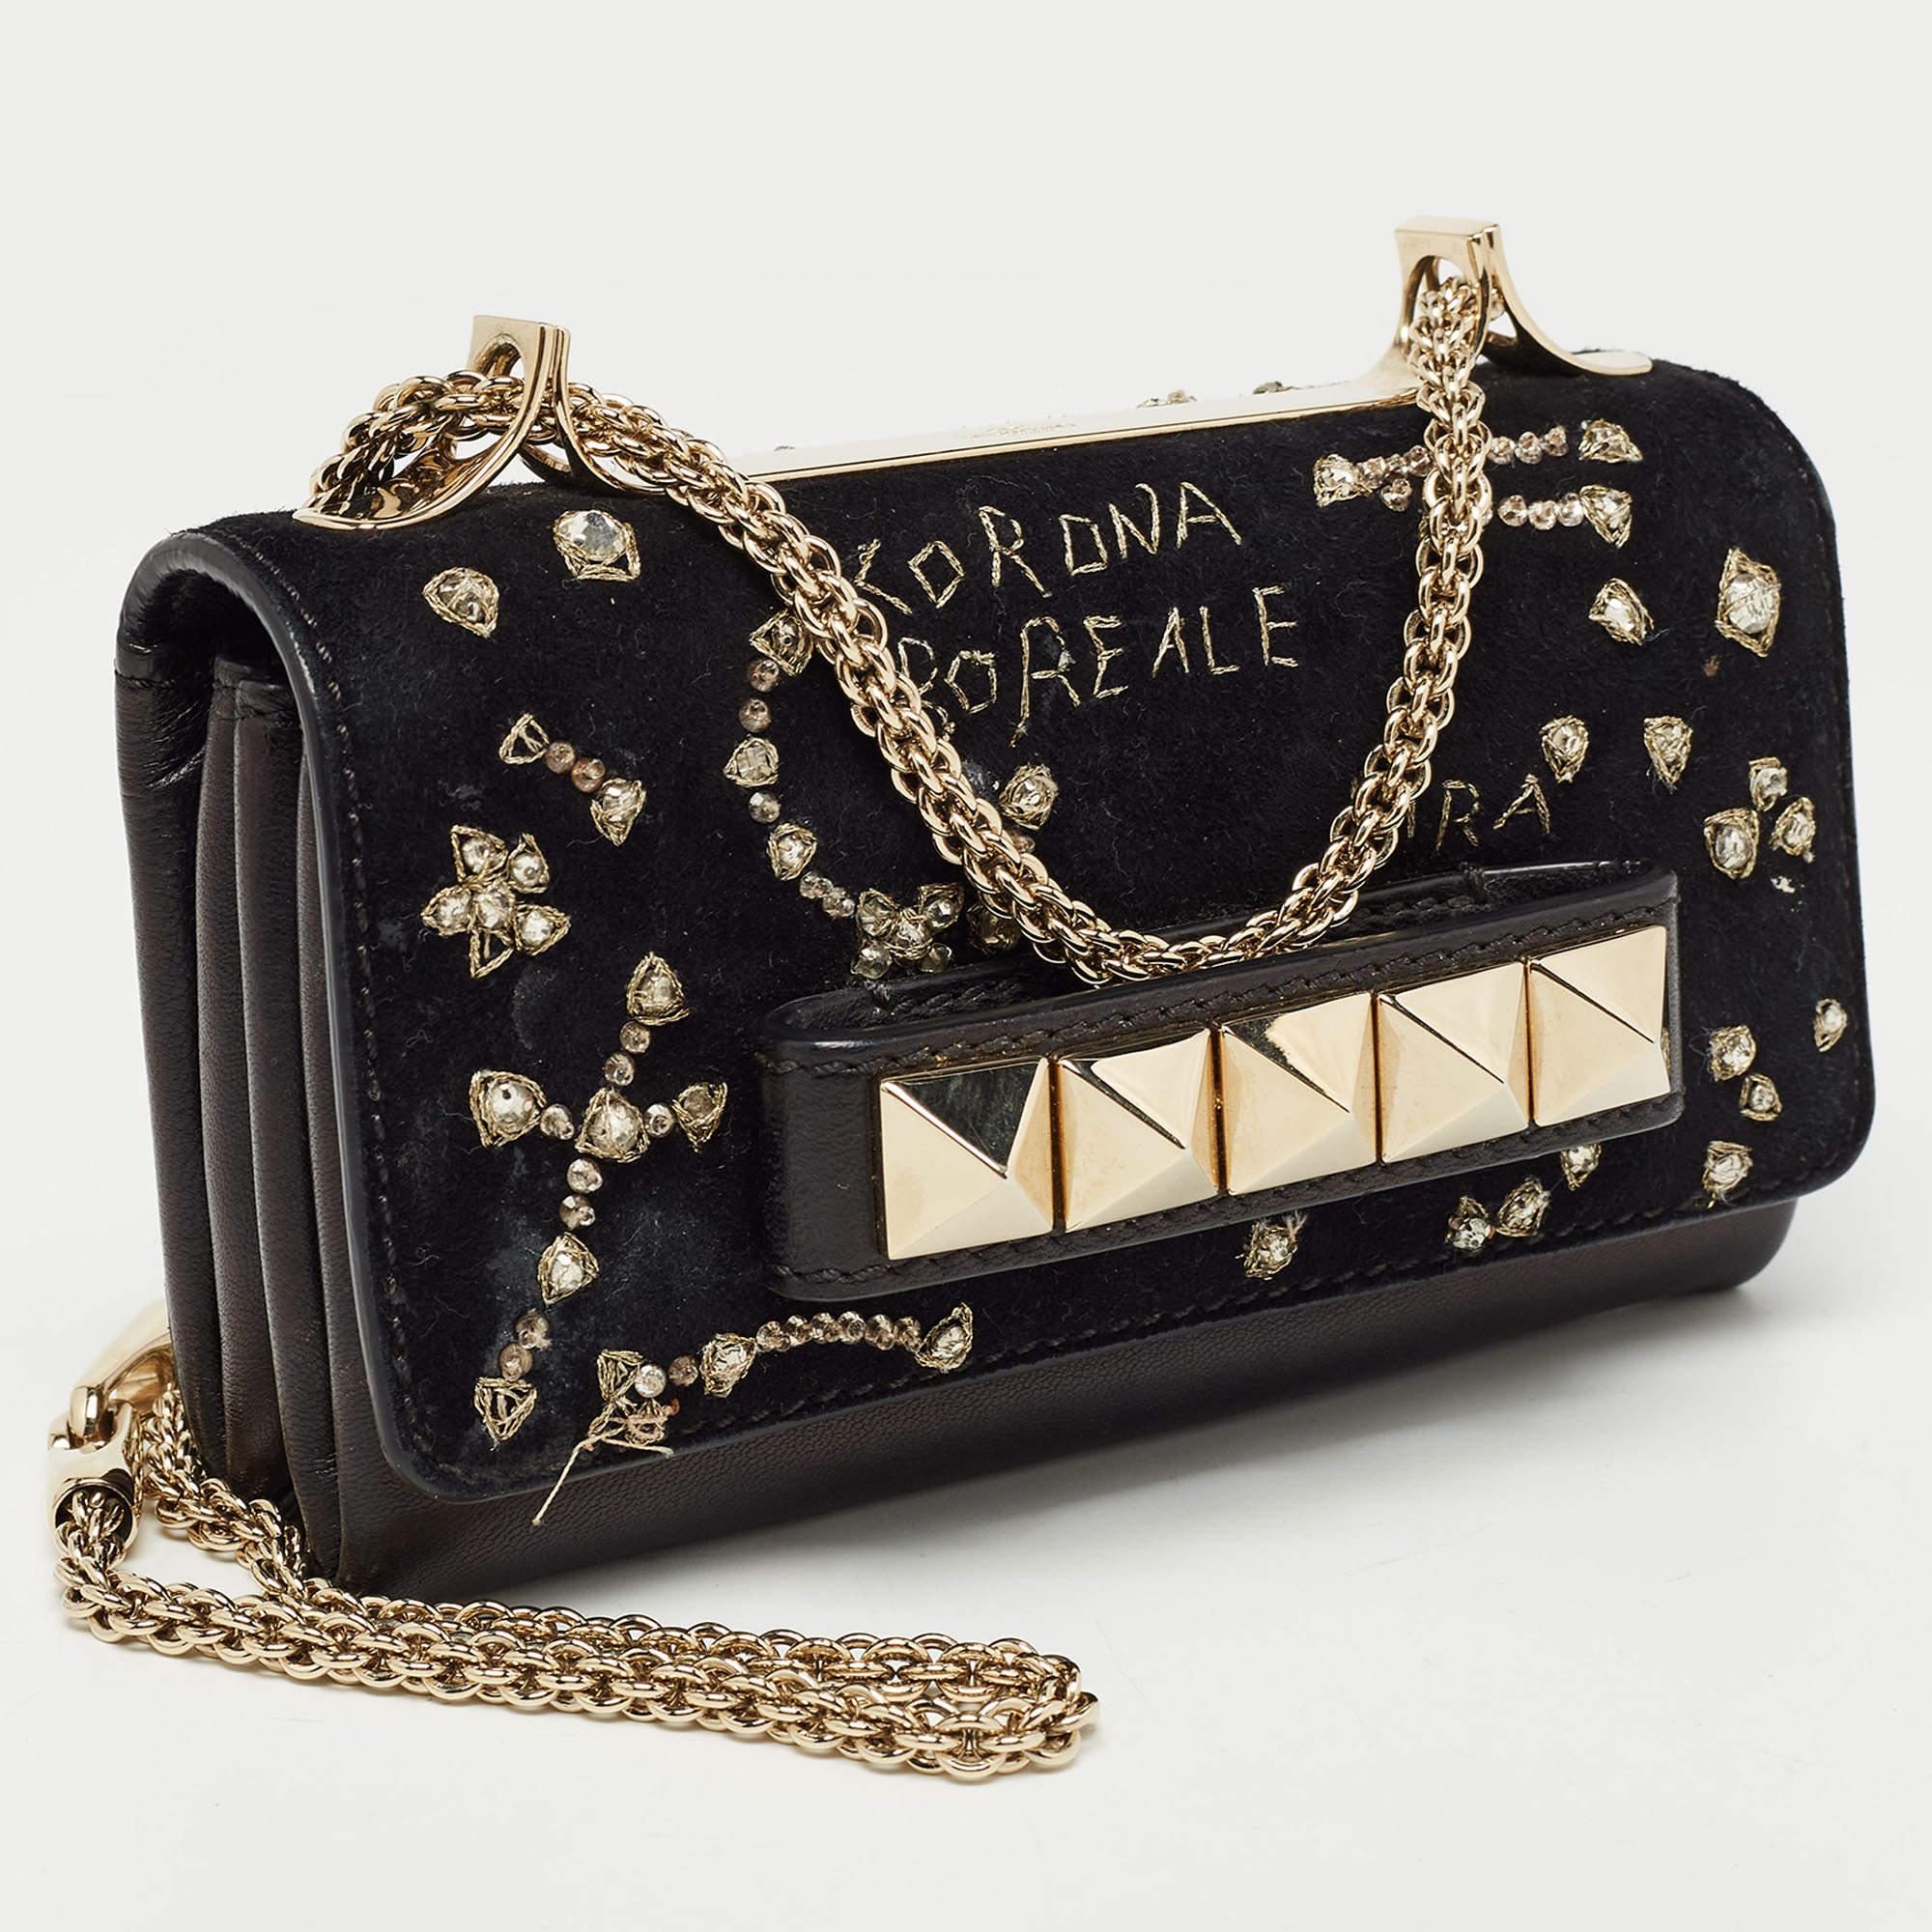 This Va Va Voom clutch bag from Valentino has a pretty captivating design. Crafted from suede and leather, the bag features gorgeous a flap, a leather interior, and a shoulder chain. It also comes with a hand slot that is decorated with their